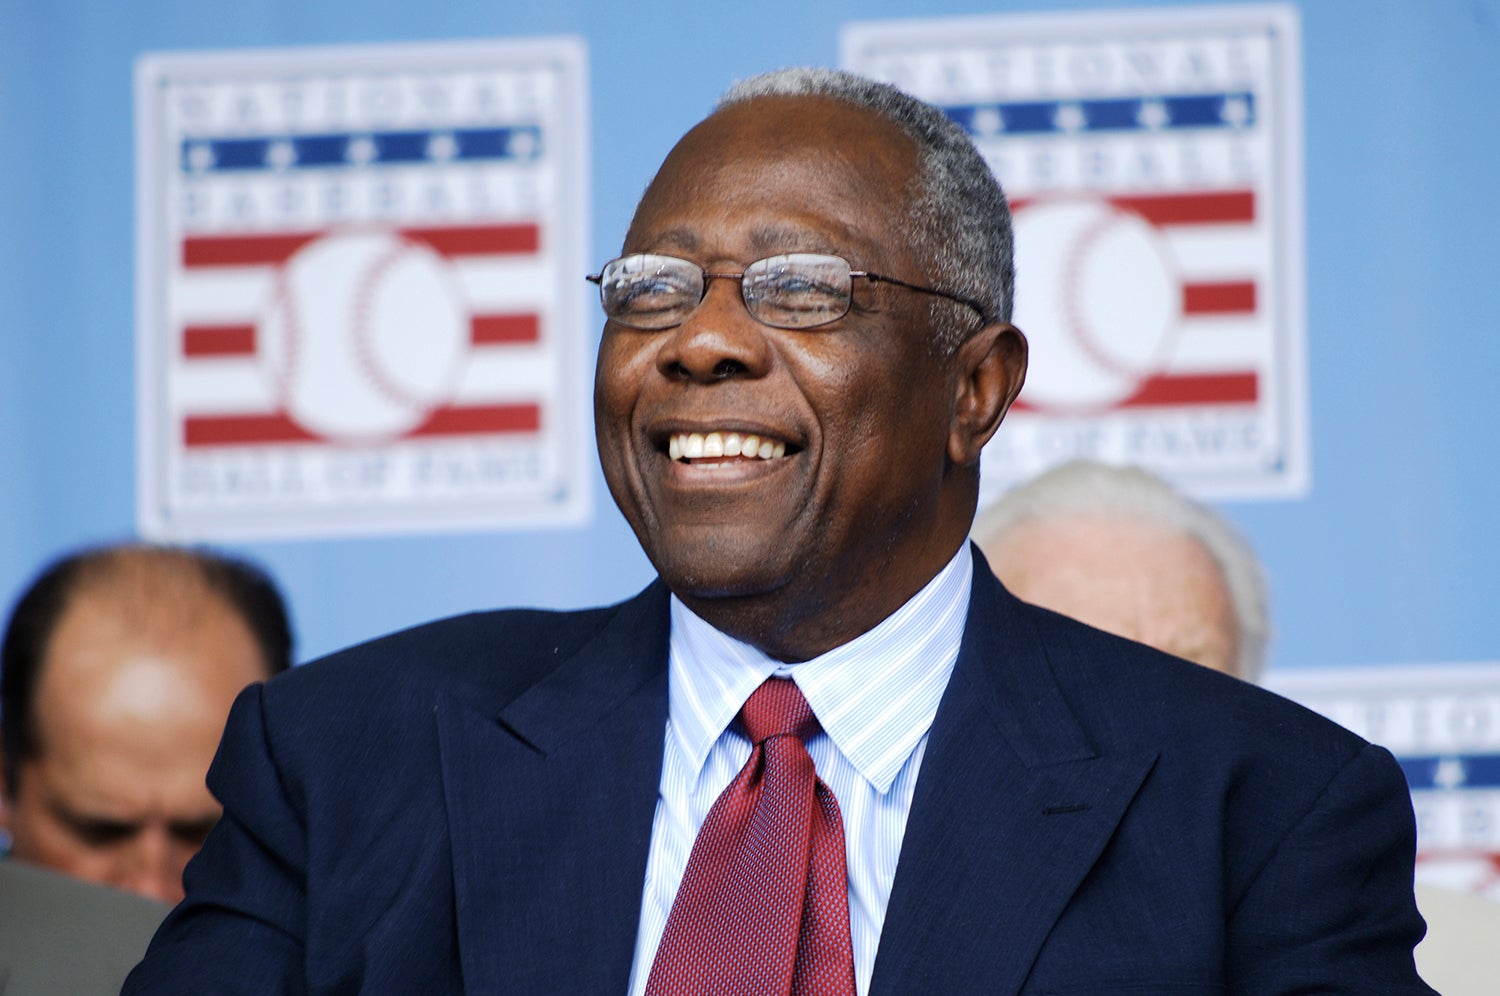 Hank Aaron at Induction Ceremony